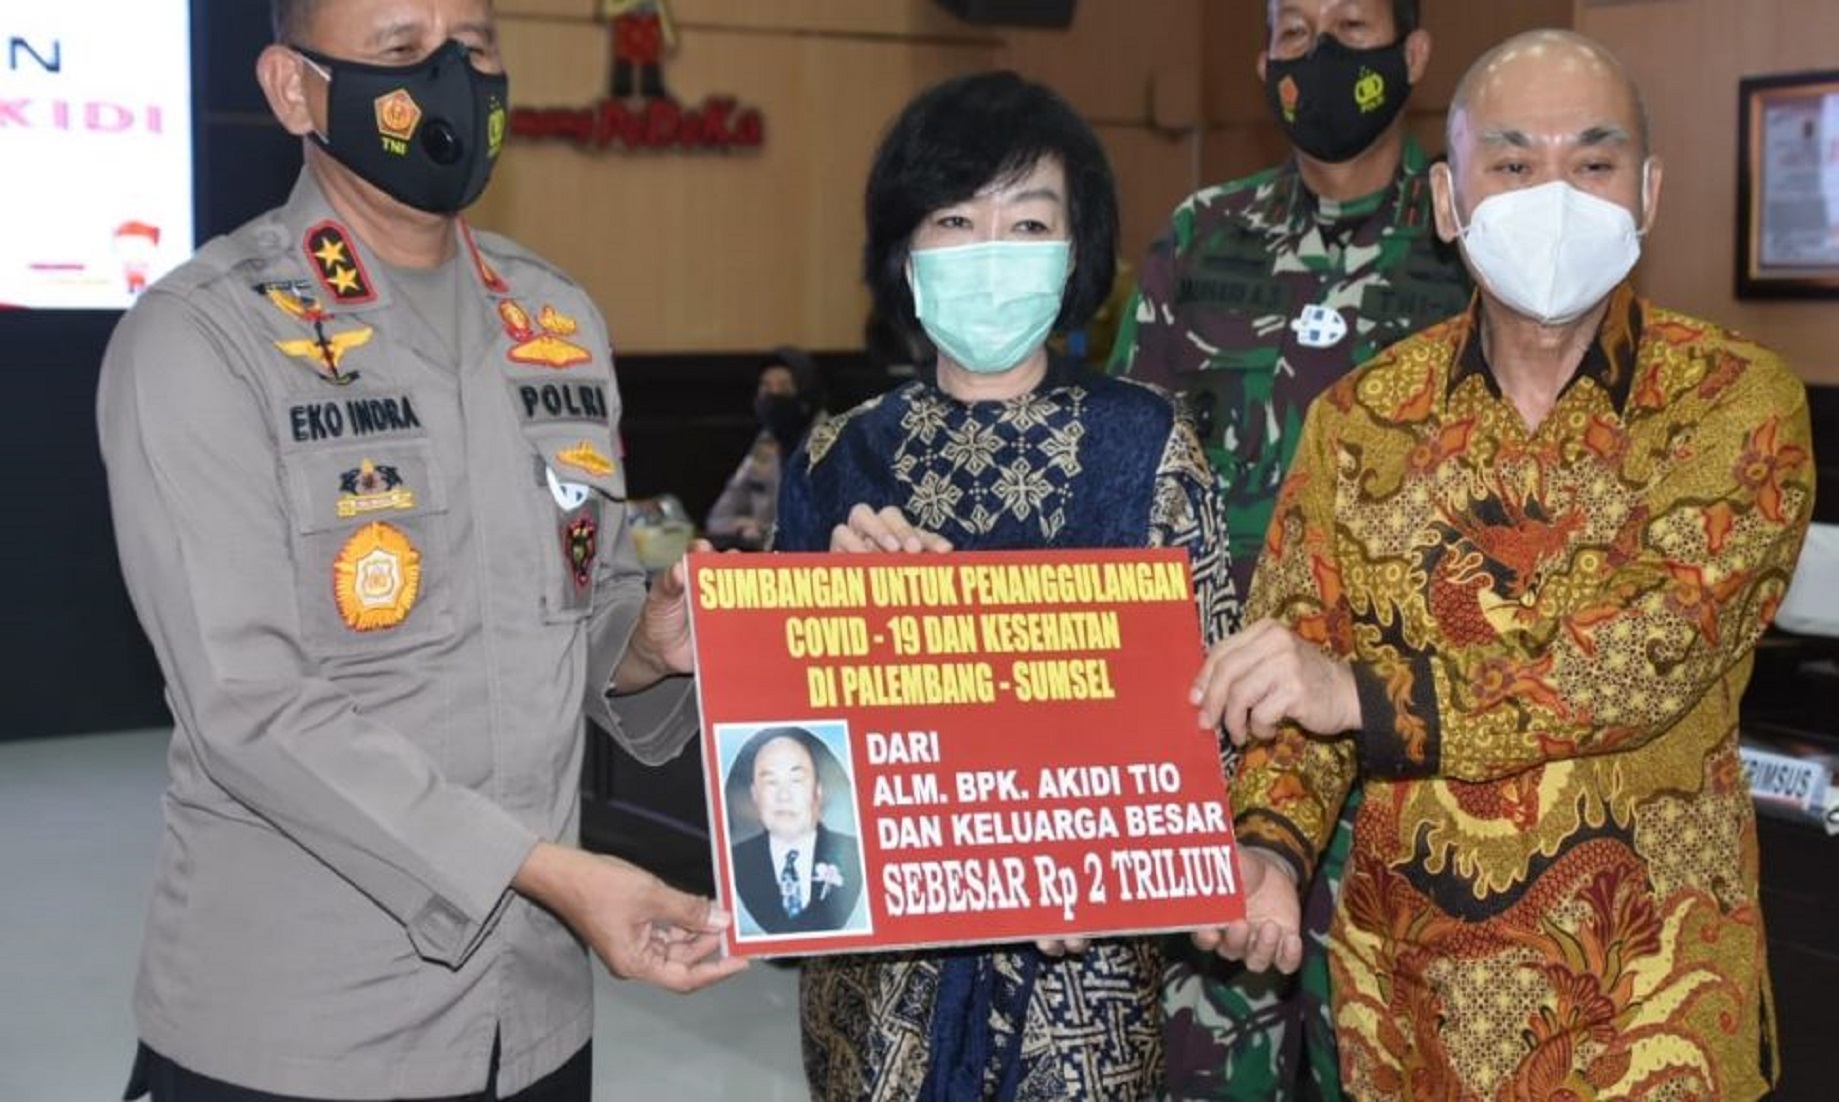 Family Of Late Entrepreneur Donates 138 Million USD For Indonesian Province To Fight COVID-19